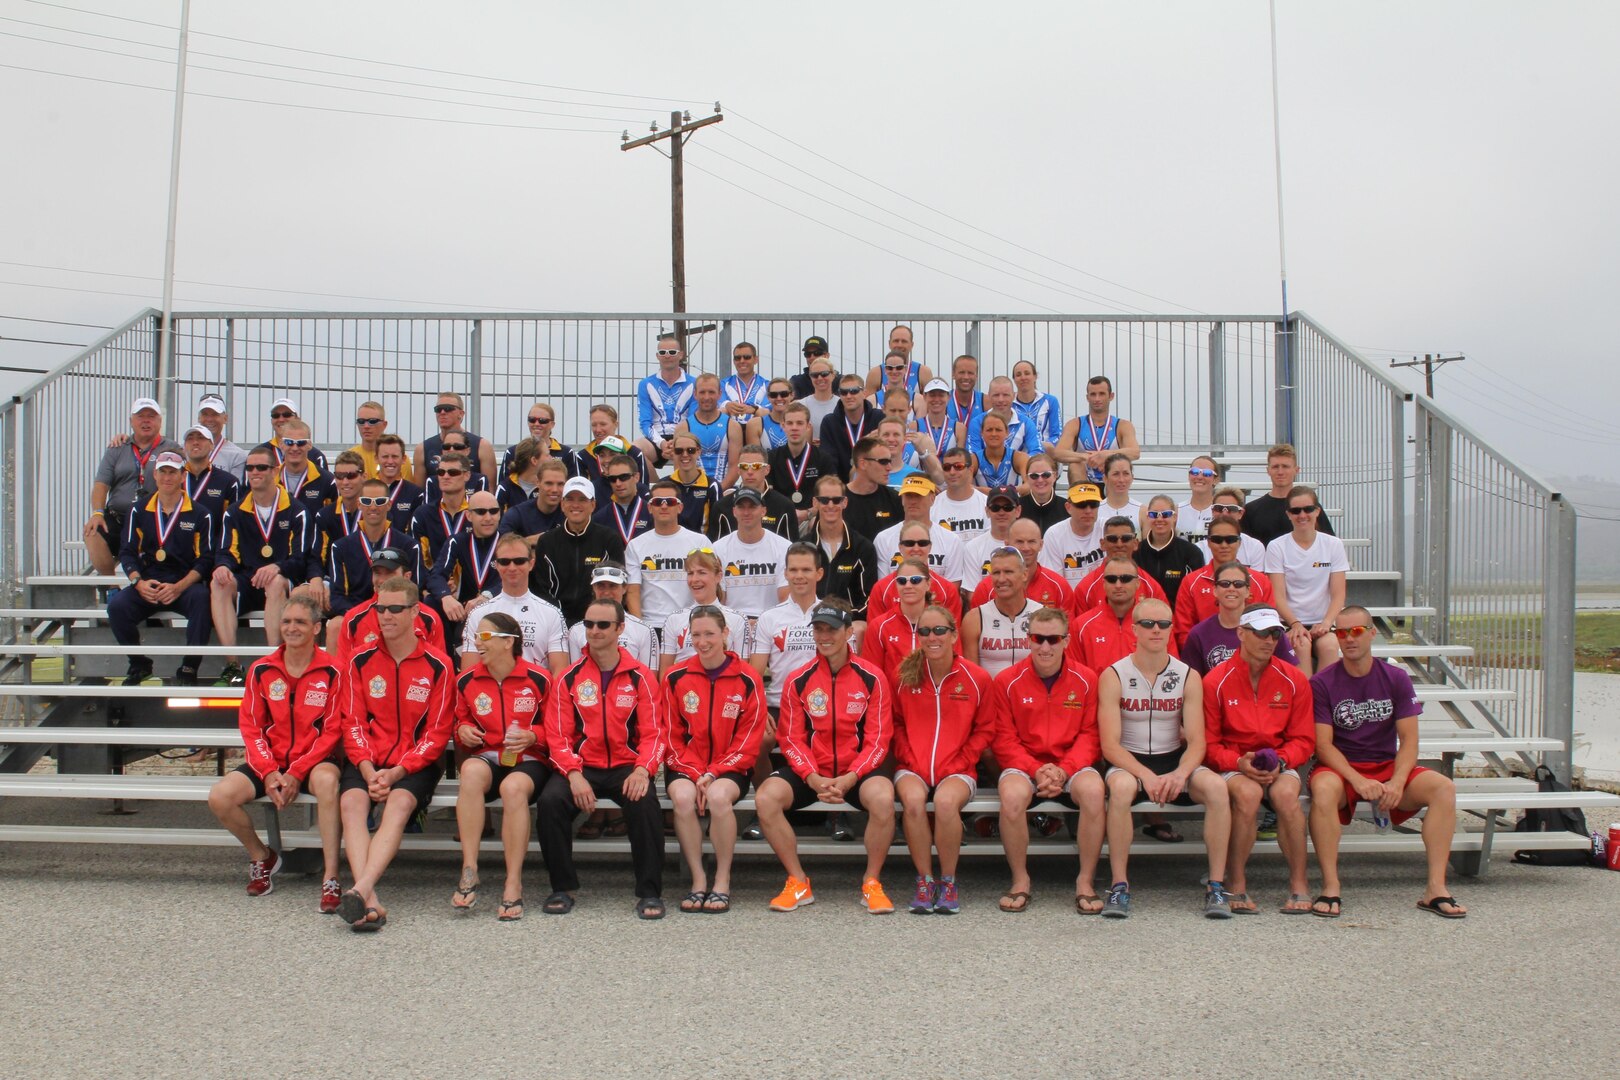 Athletes from across the Services to include Canadian Forces team compete at the 2013 Armed Forces Triathlon Championship at NBVC, CA on 1 Jun  